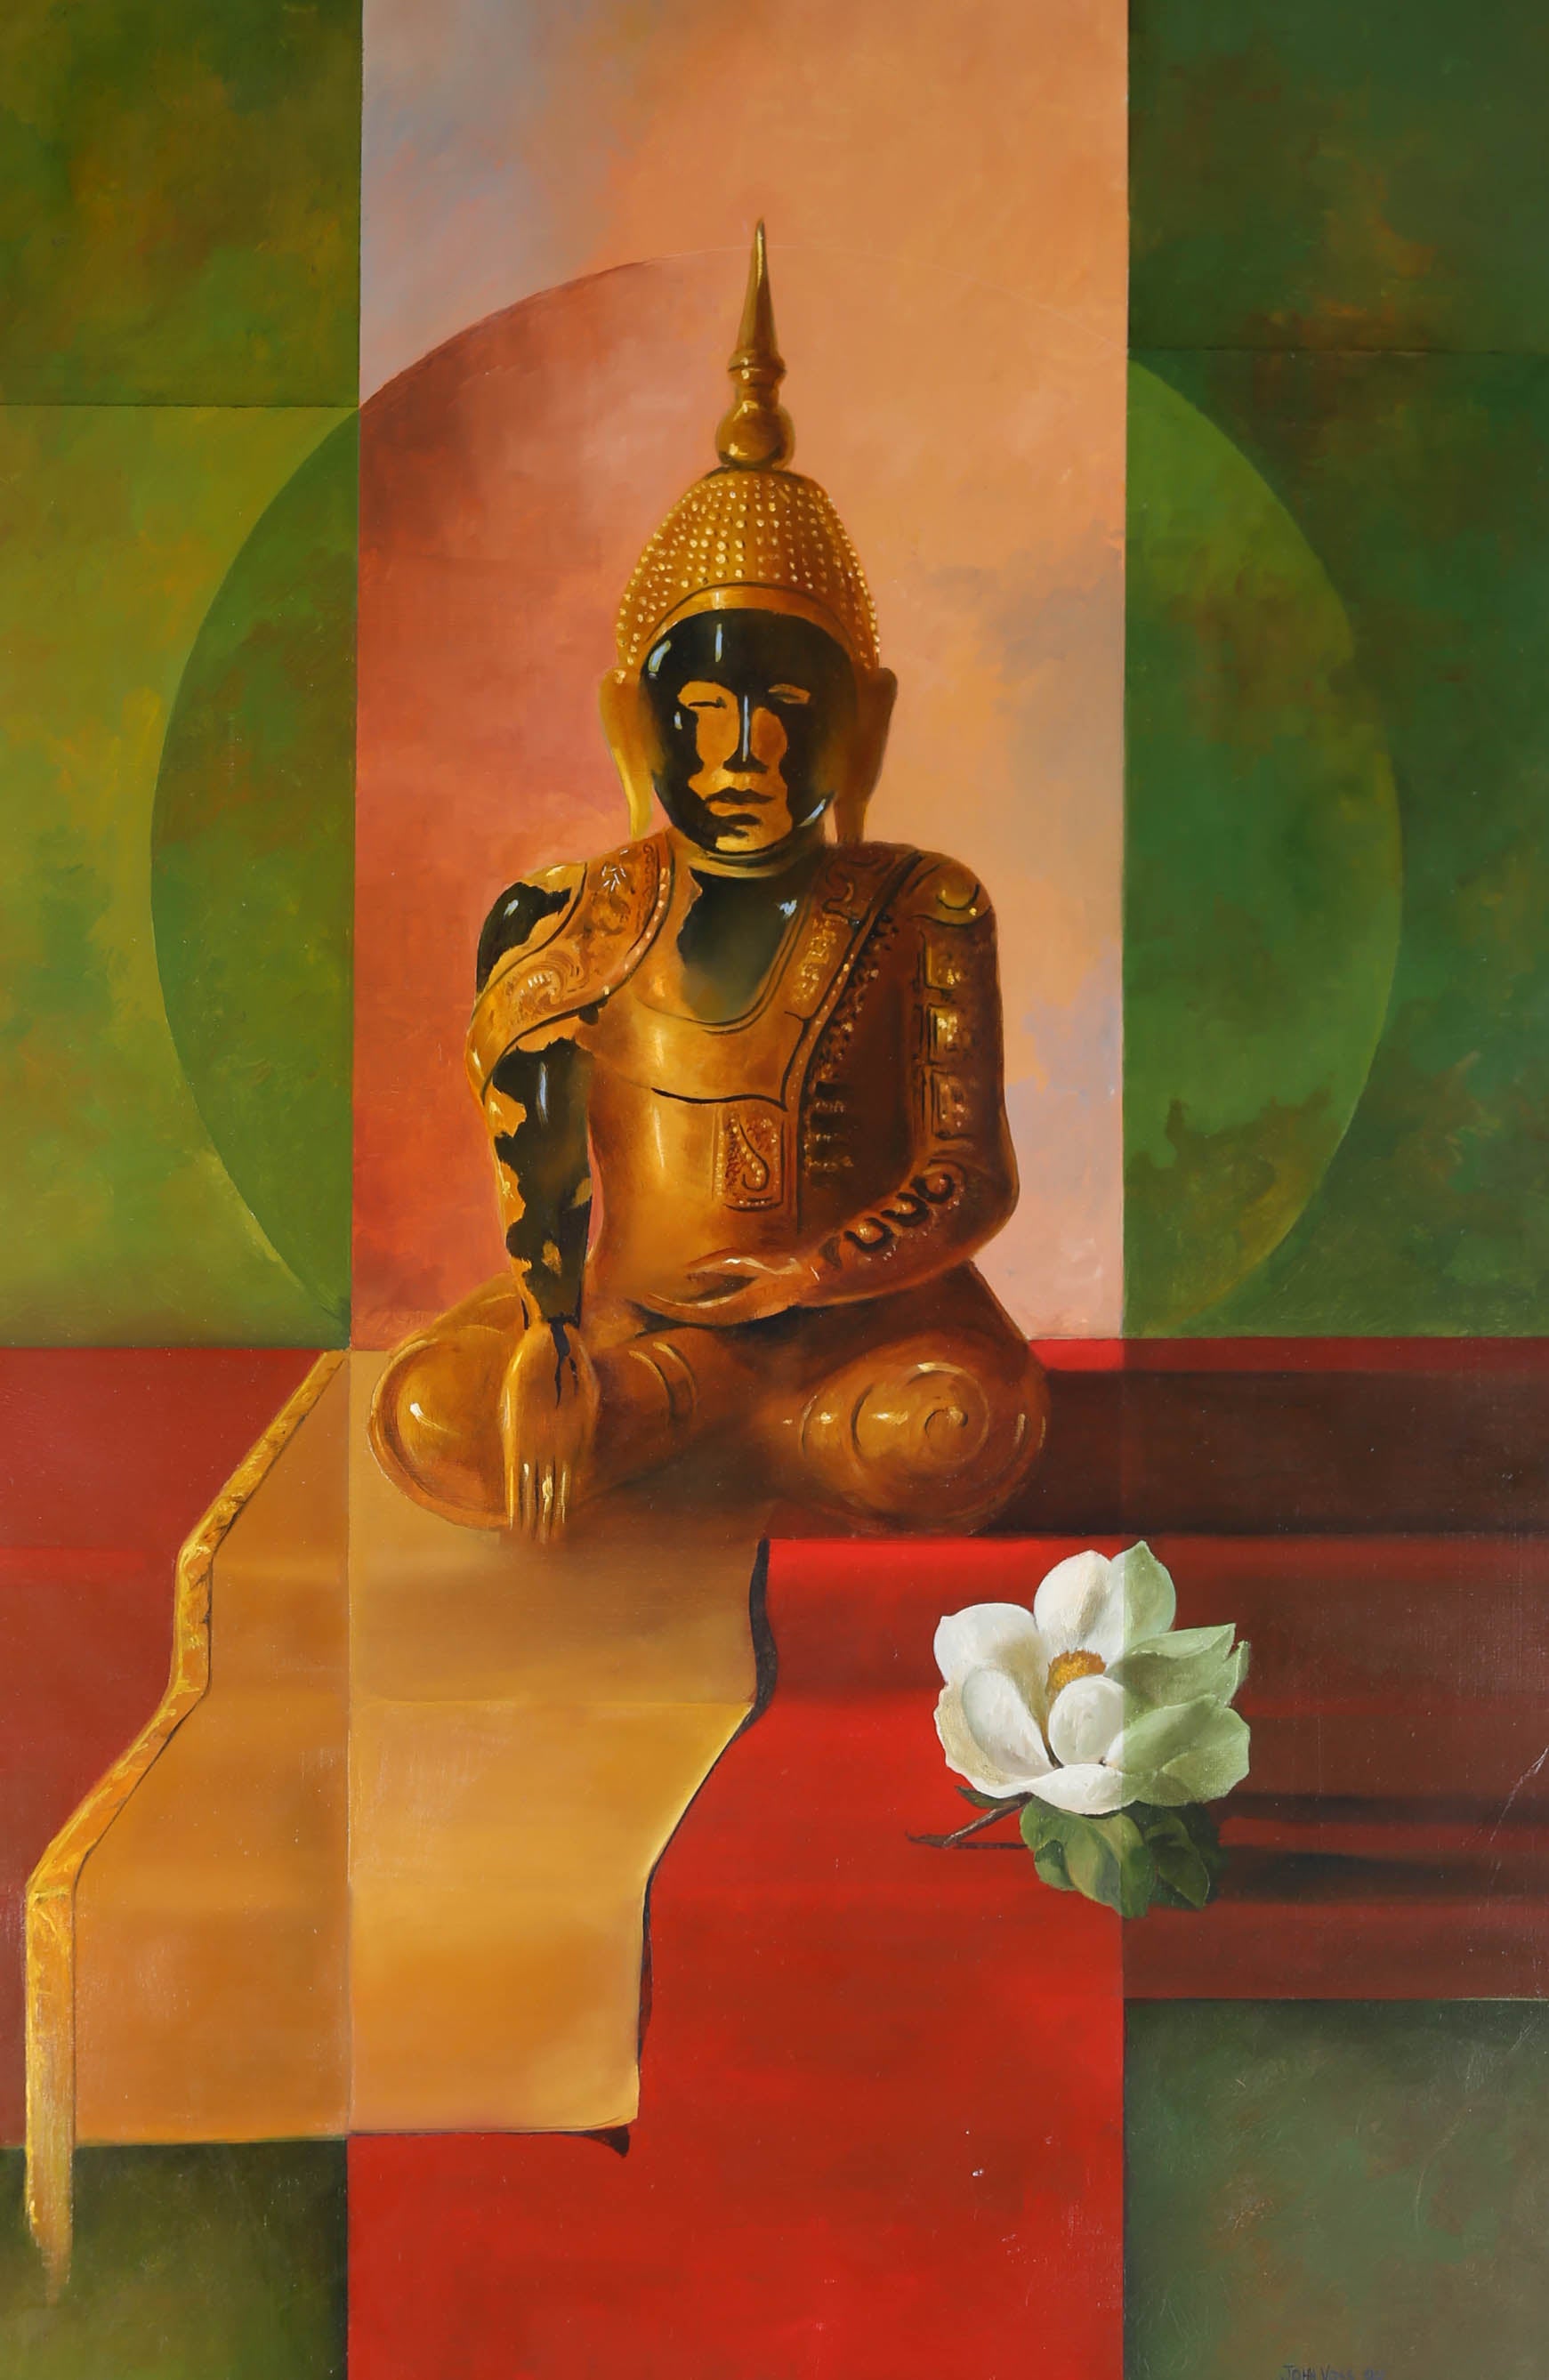 A striking 20th Century still life, combining Surrealism with elements of exquisitely painted trompe-l'œil. The surrealist still life shows a Buddha, its golden surface crumbling to revela black underneath, sits on red steps, with a delicate white